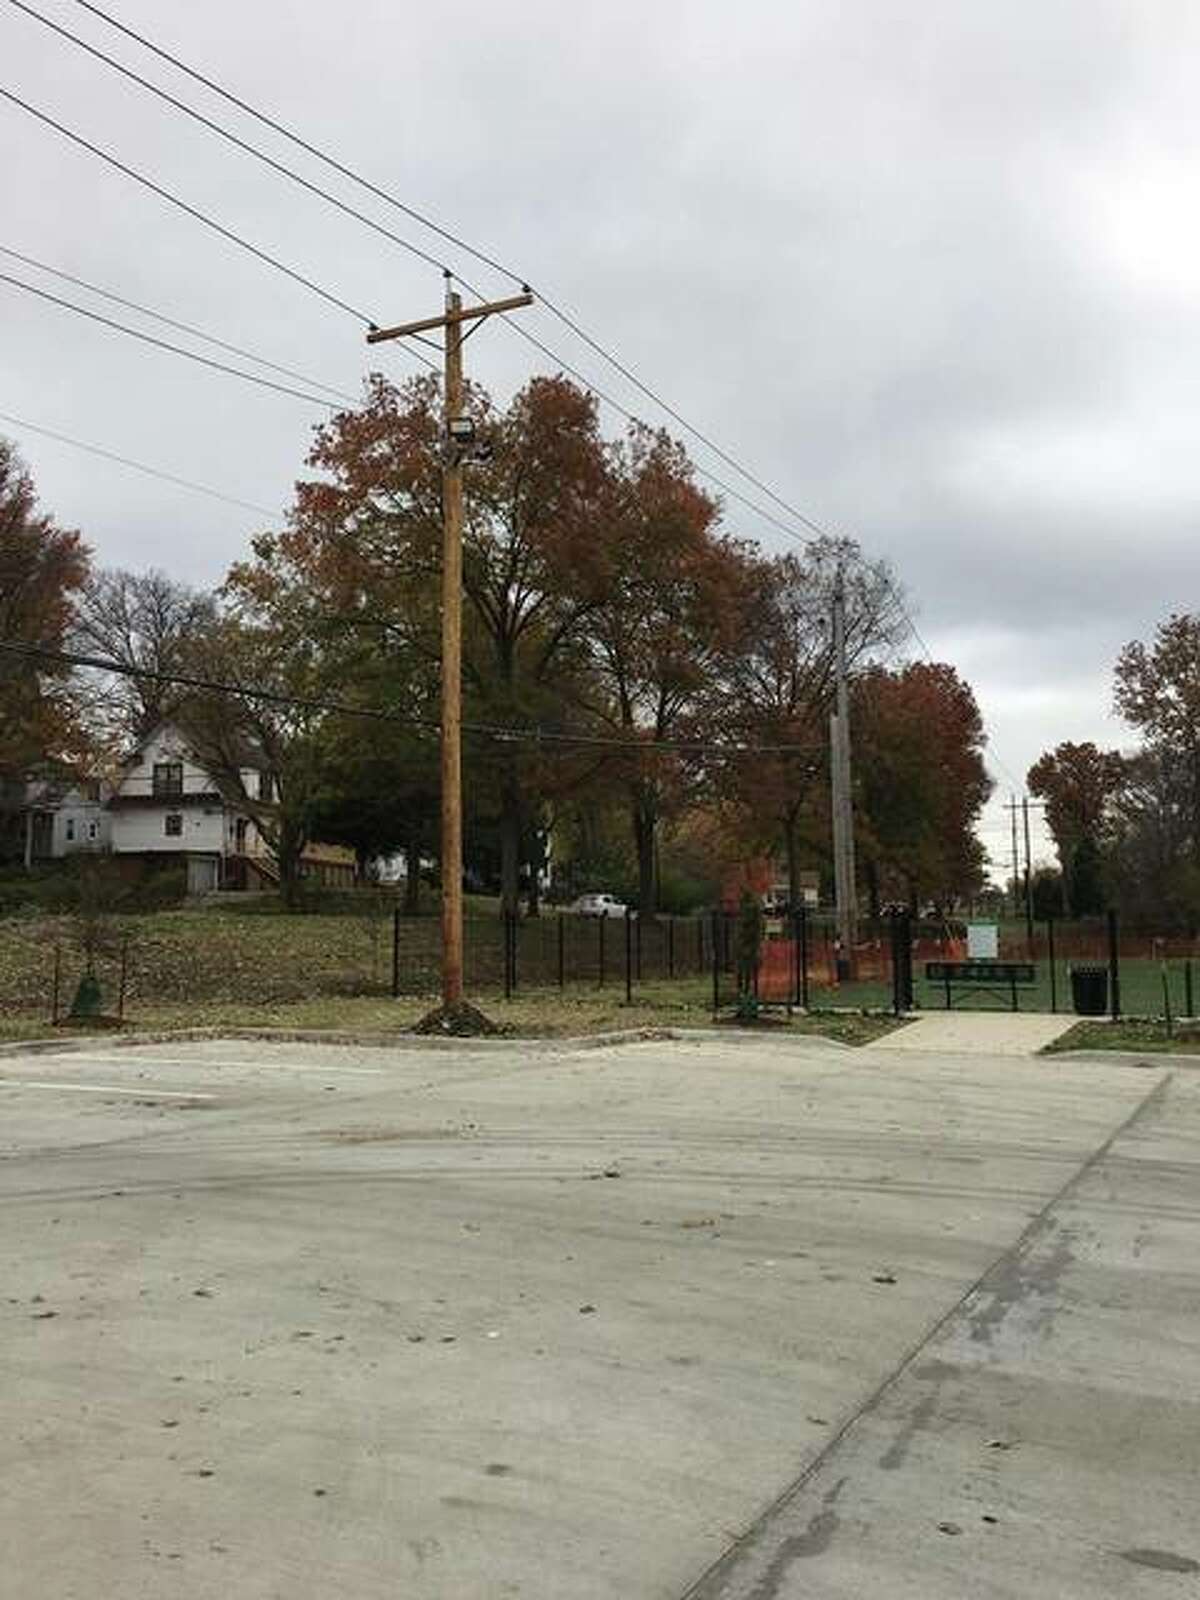 Edwardsville Parks and Recreation recently enlisted Ameren Illinois to install a new dawn to dusk light at Schwarz Street Dog Park, which opened in the fall. The light, pictured, is to help pet owners see their animals in the evening and provide visitors safety.